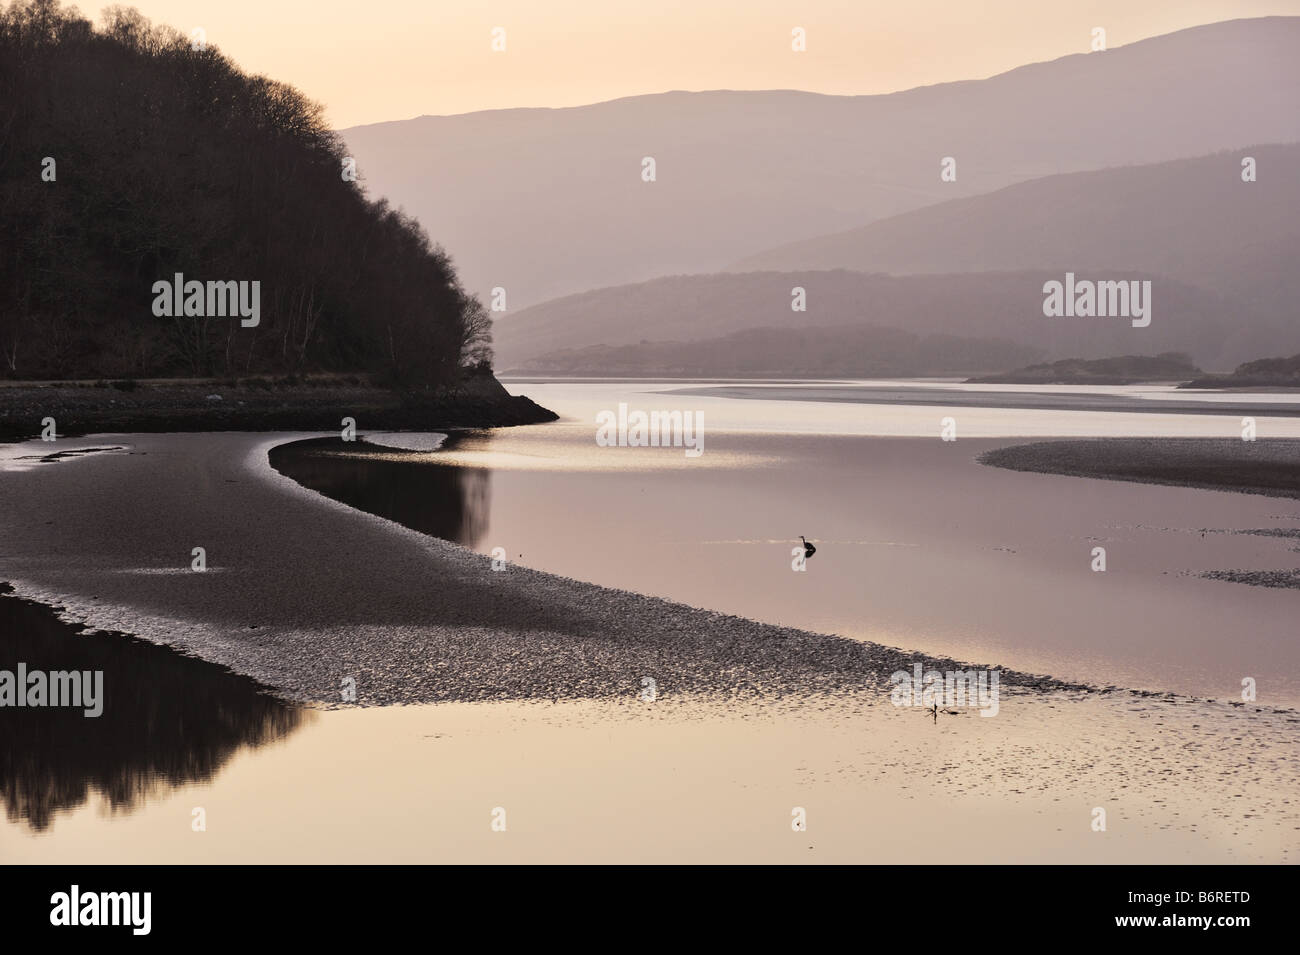 Sunset over the Mawddach Estuary, with heron in water, near Dolgellau, Wales, UK Stock Photo